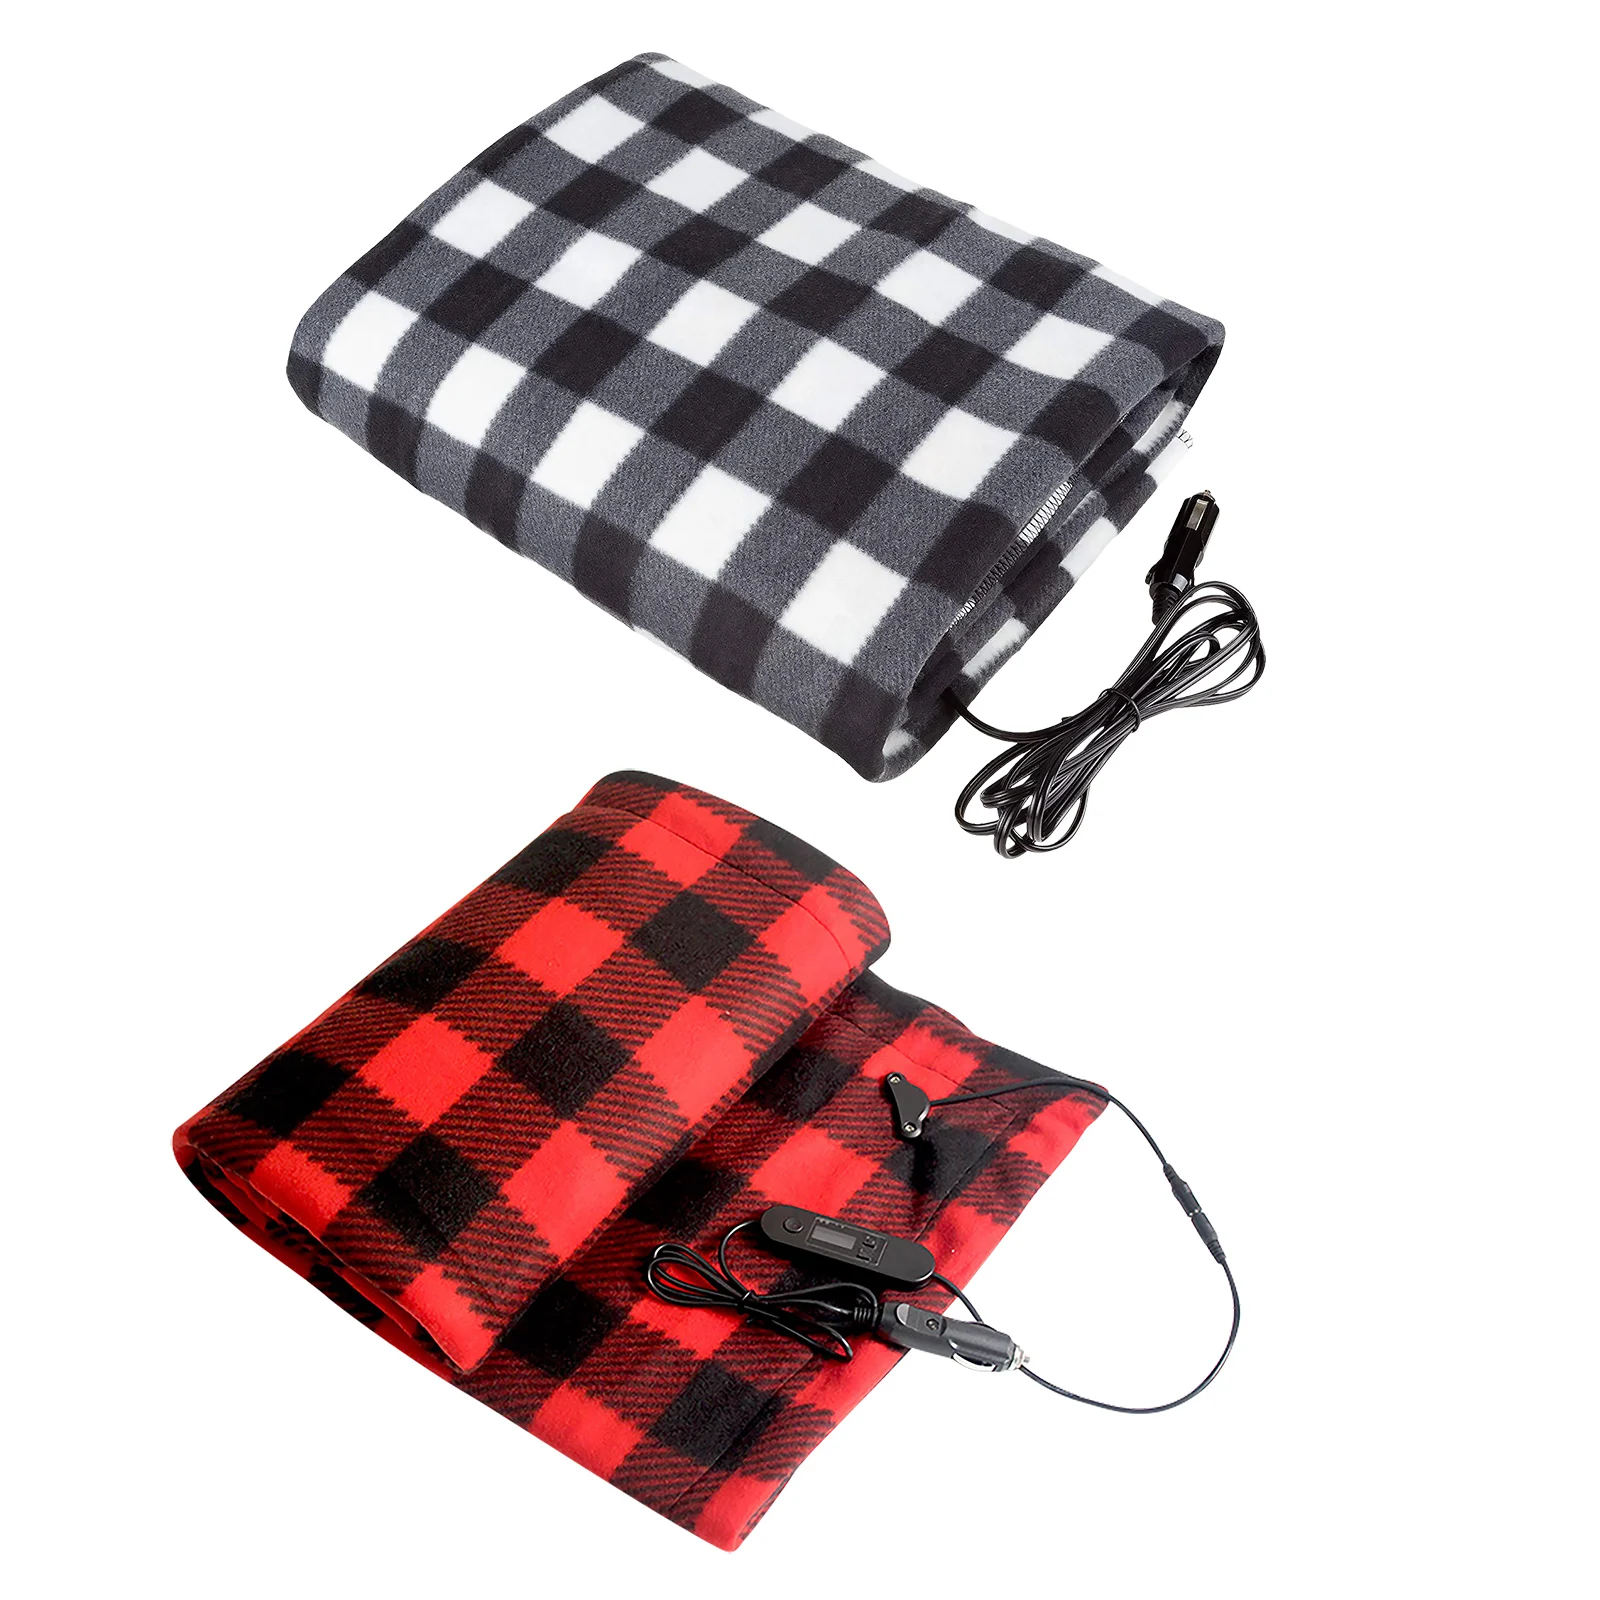 Strong And Durable Car Electric Heating Blanket Winter Charging Heater Constant Temperature Built-in Fuse For Safety Non-slip Fabric Smooth 